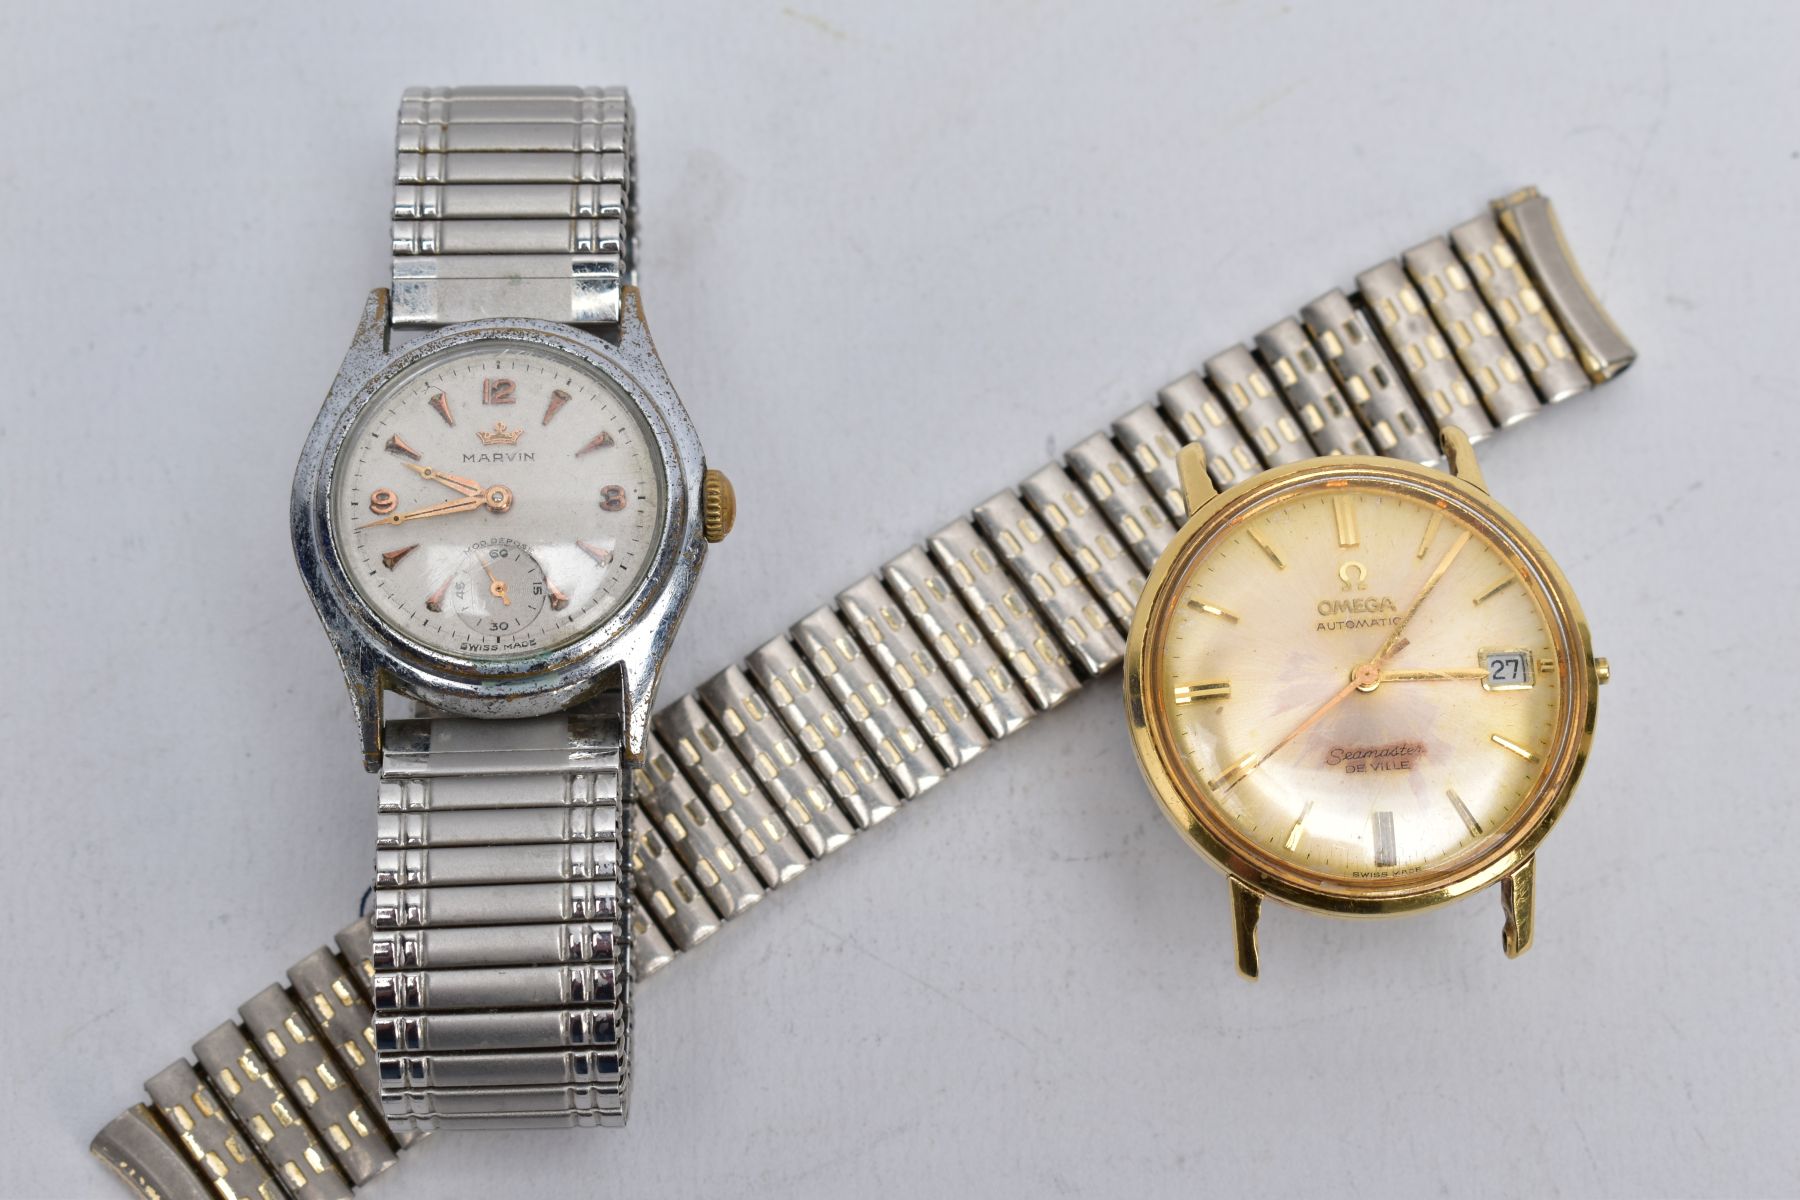 TWO GENTS WRISTWATCHES, to include an Omega Seamaster, circular gold tone dial signed 'Omega